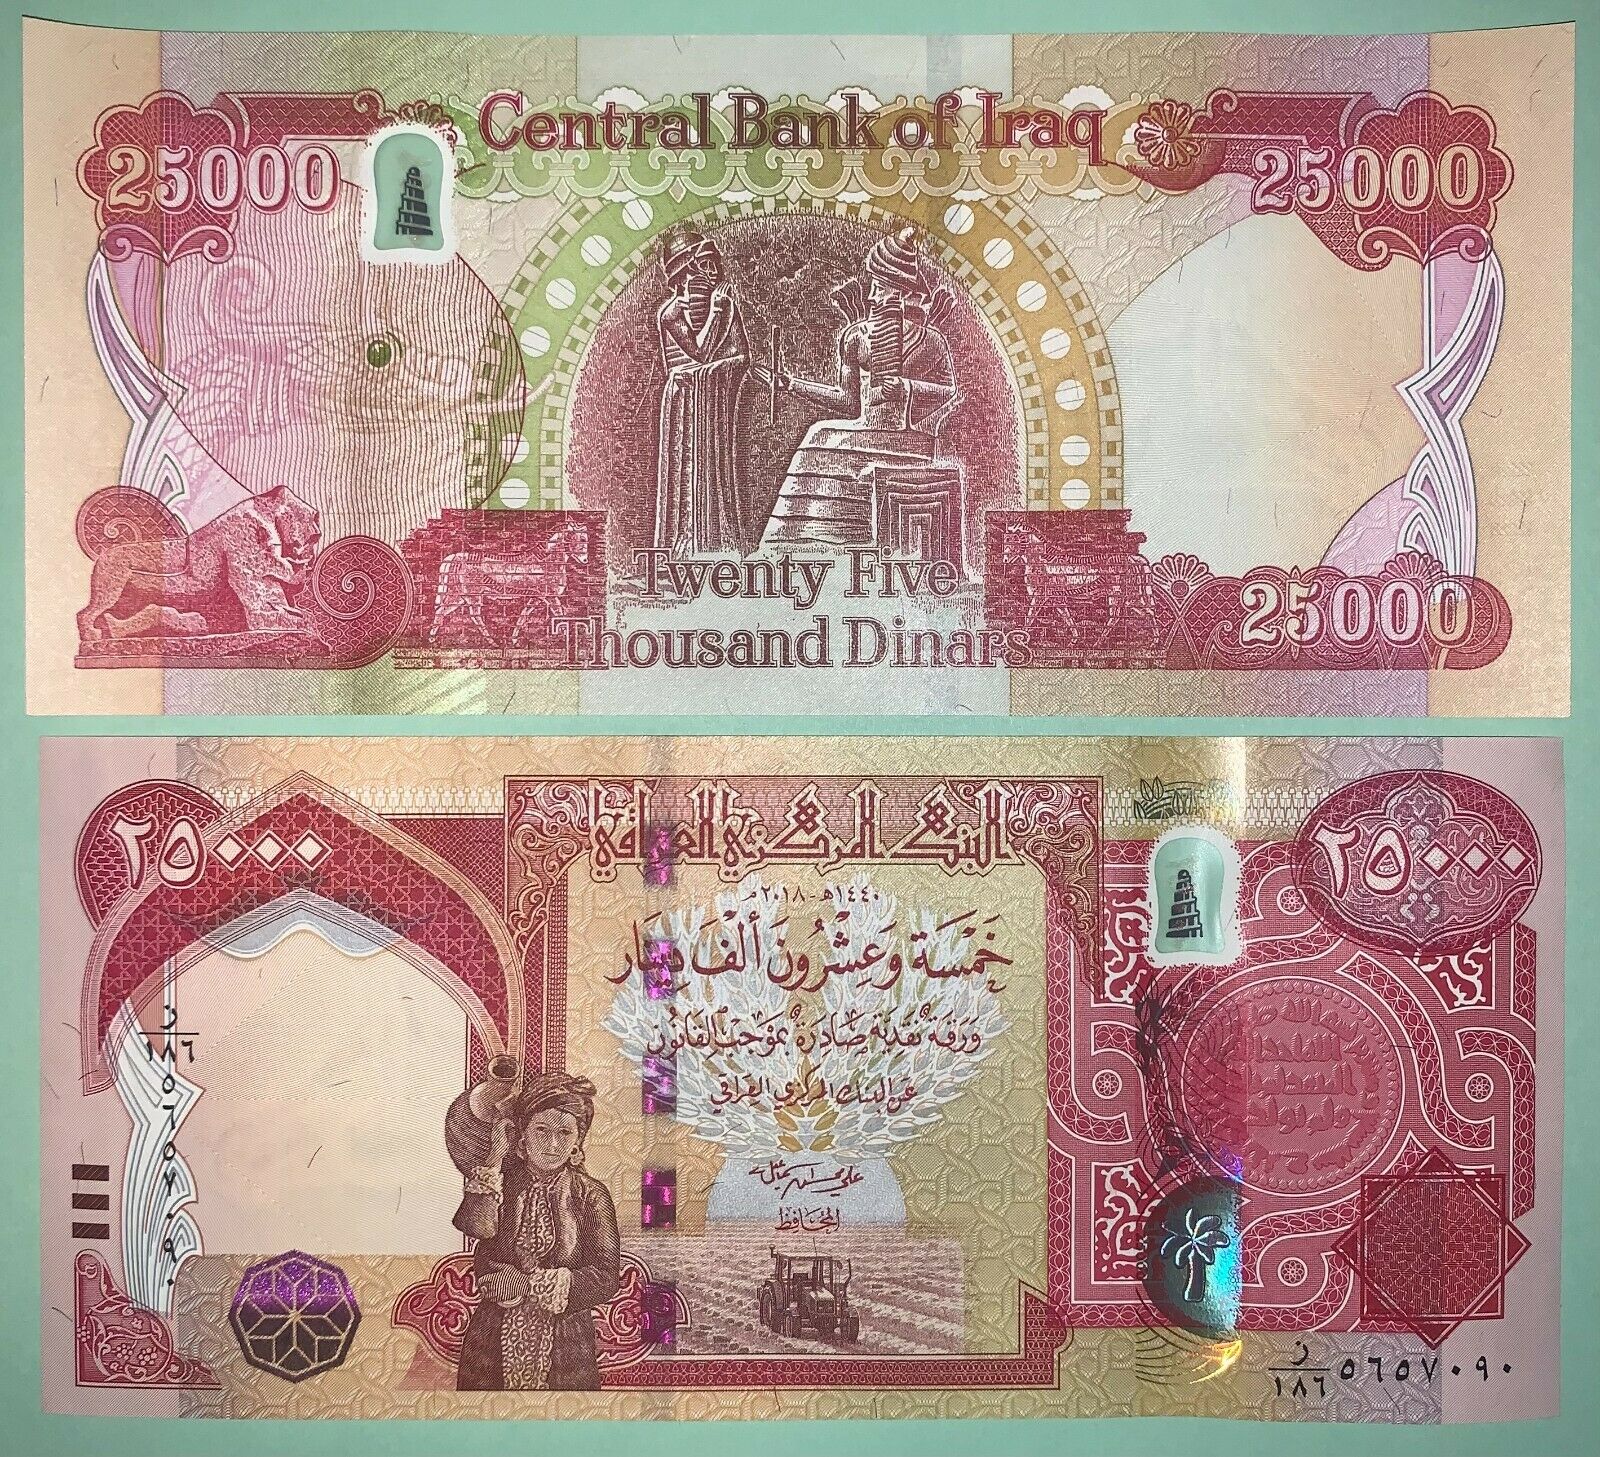 IRAQ CURRENCY (IQD) - 25000 IRAQI DINAR - 25,000 UNCIRCULATED, ACTIVE AUTHENTIC